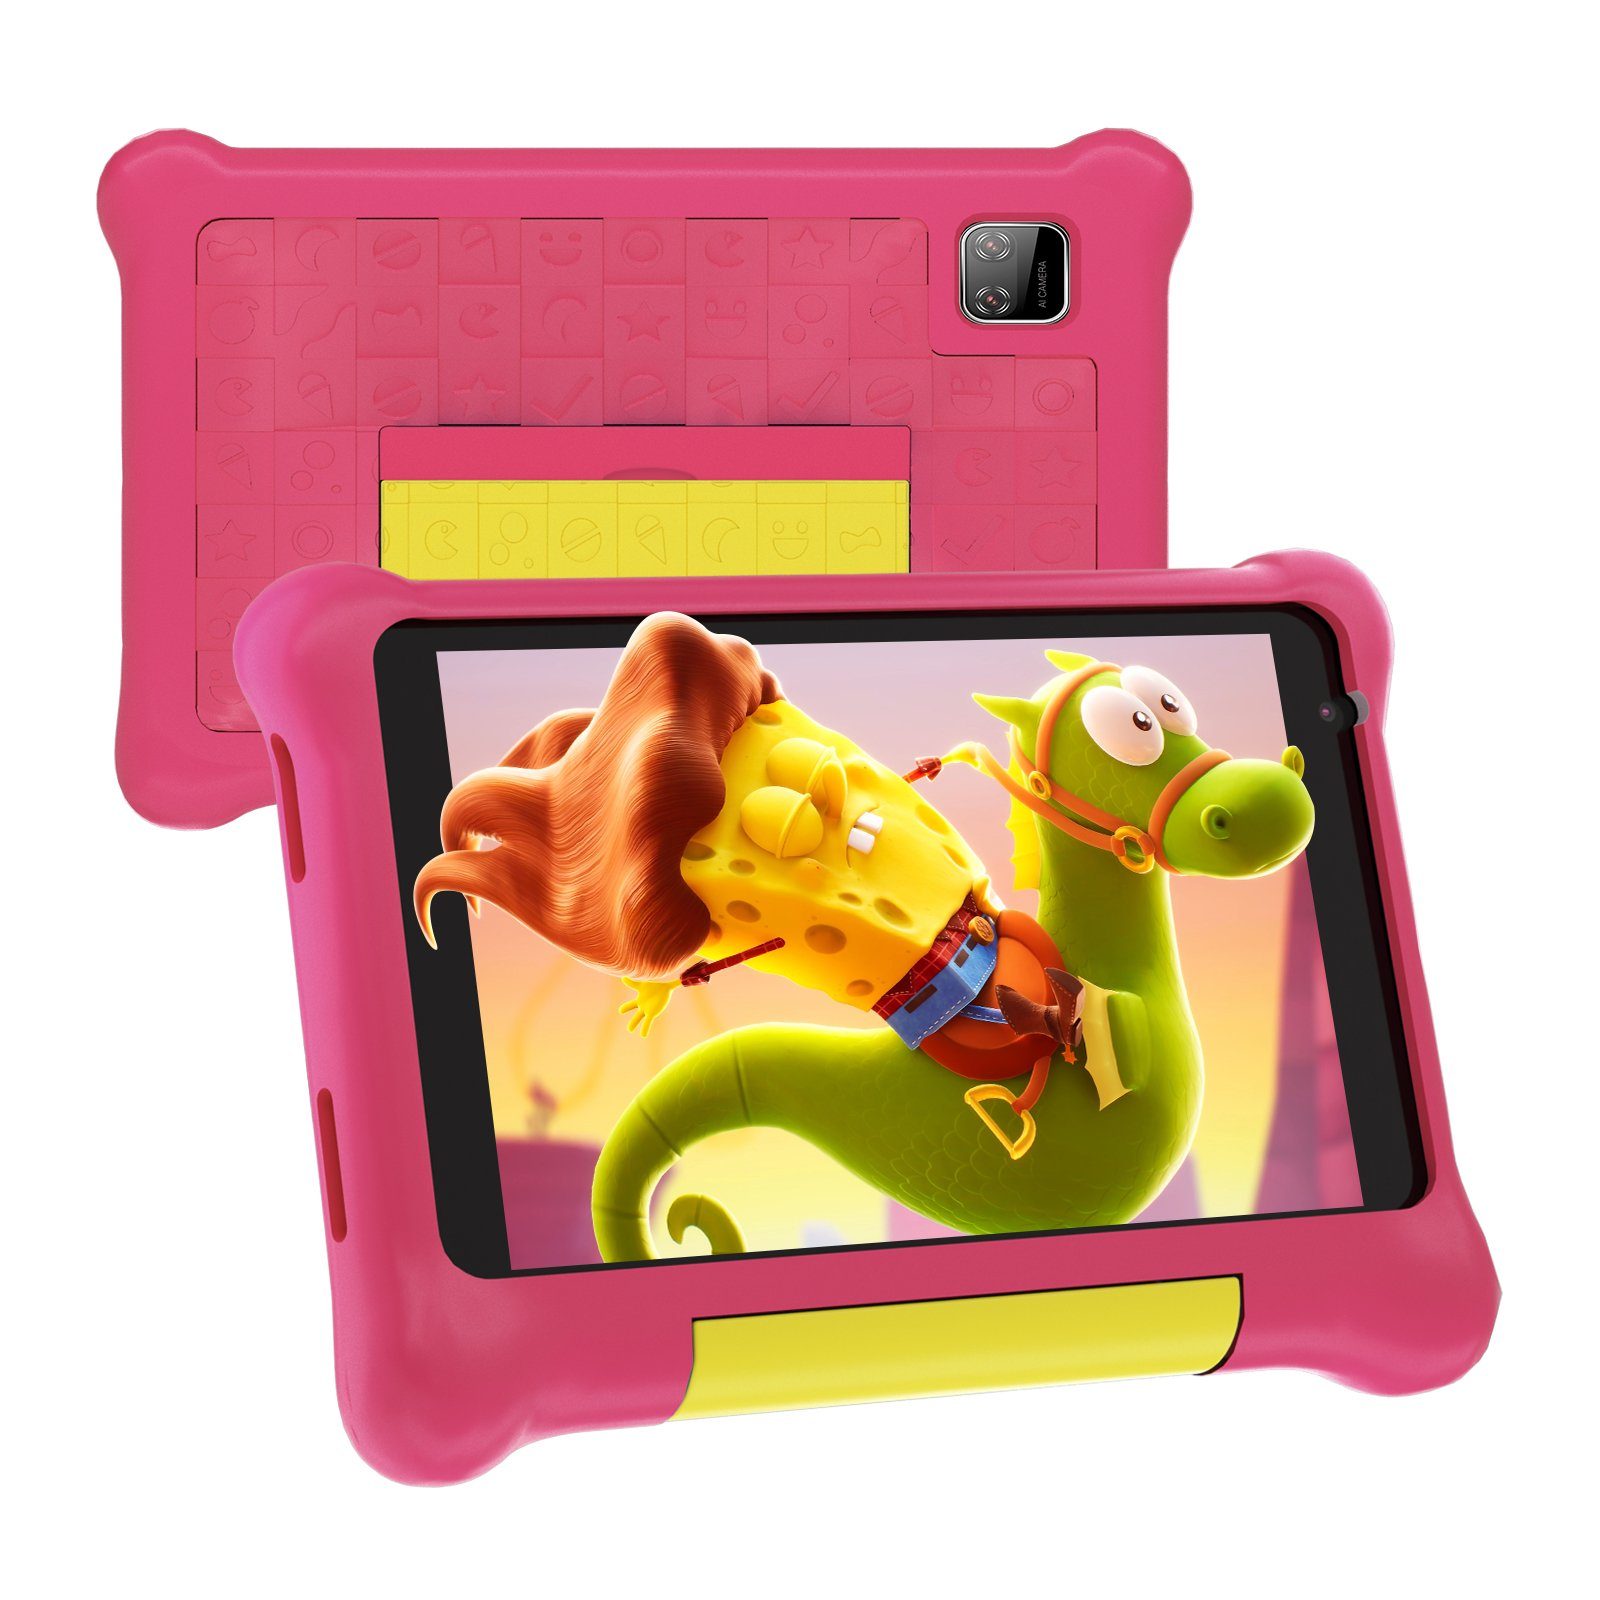 Happybe TK707 Tablet (7", 32 GB, Android 12, leicht, kindersicher) pink